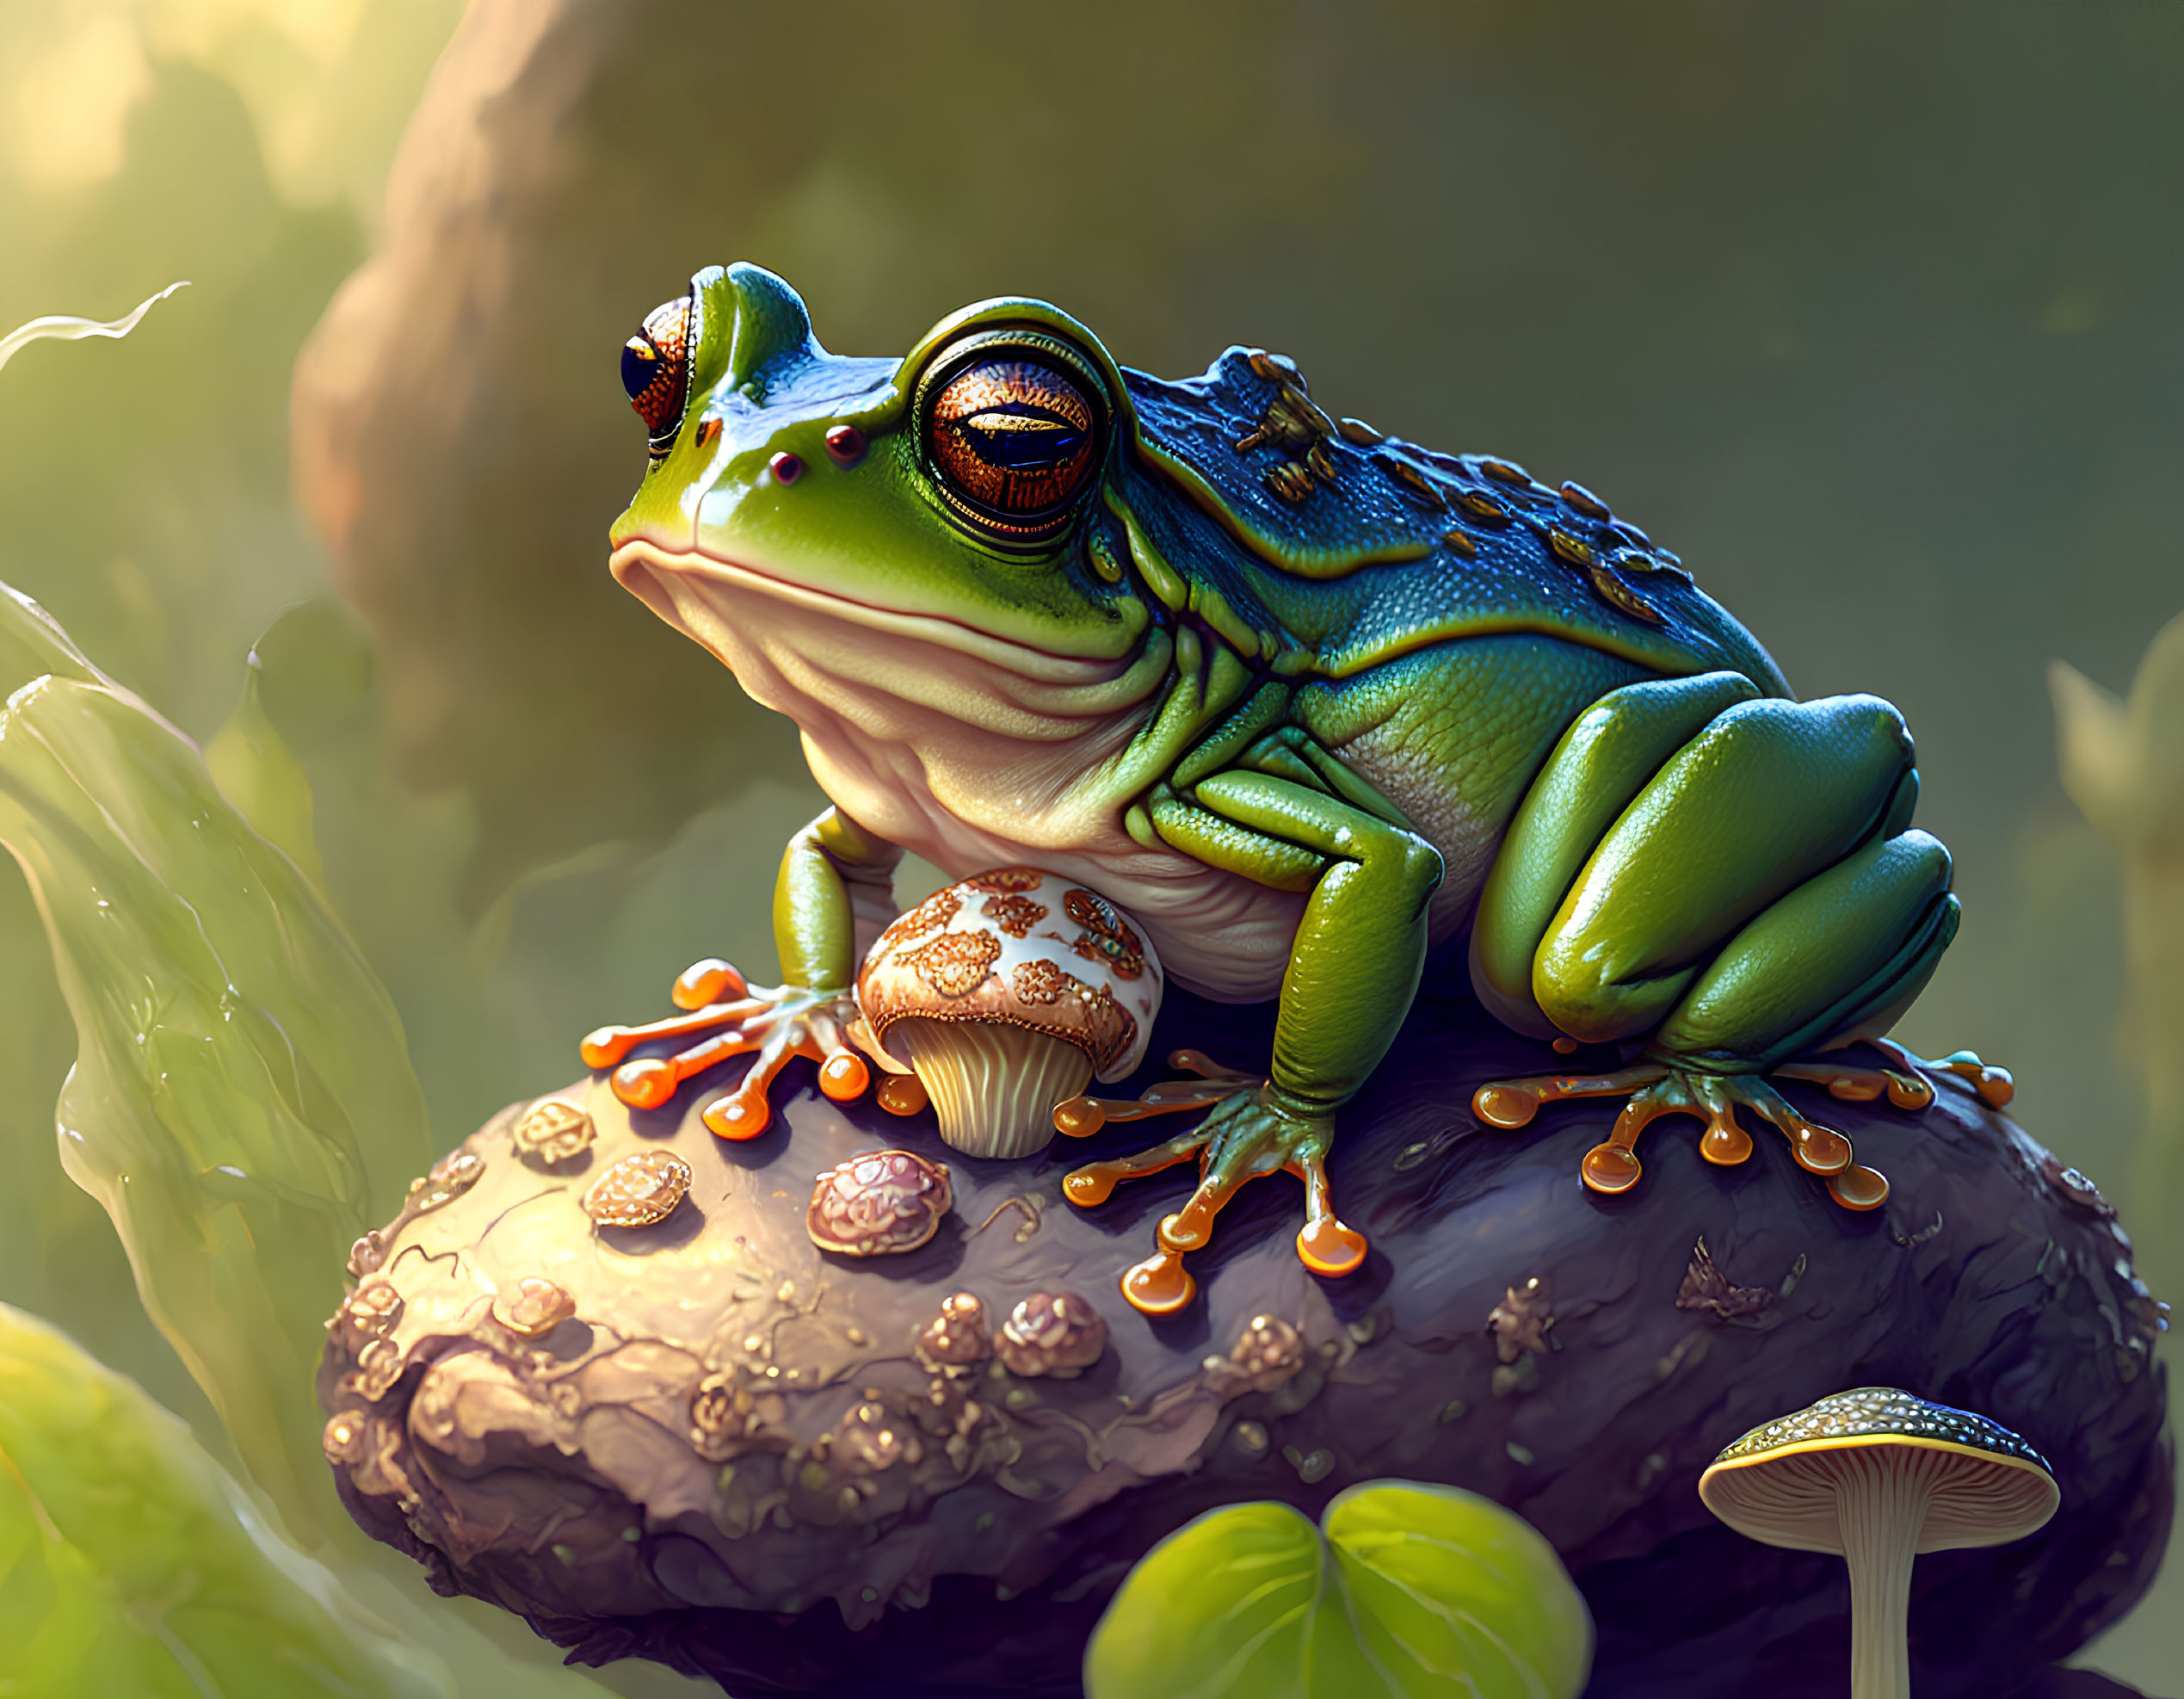 Vibrant digital artwork of stylized frog in natural setting